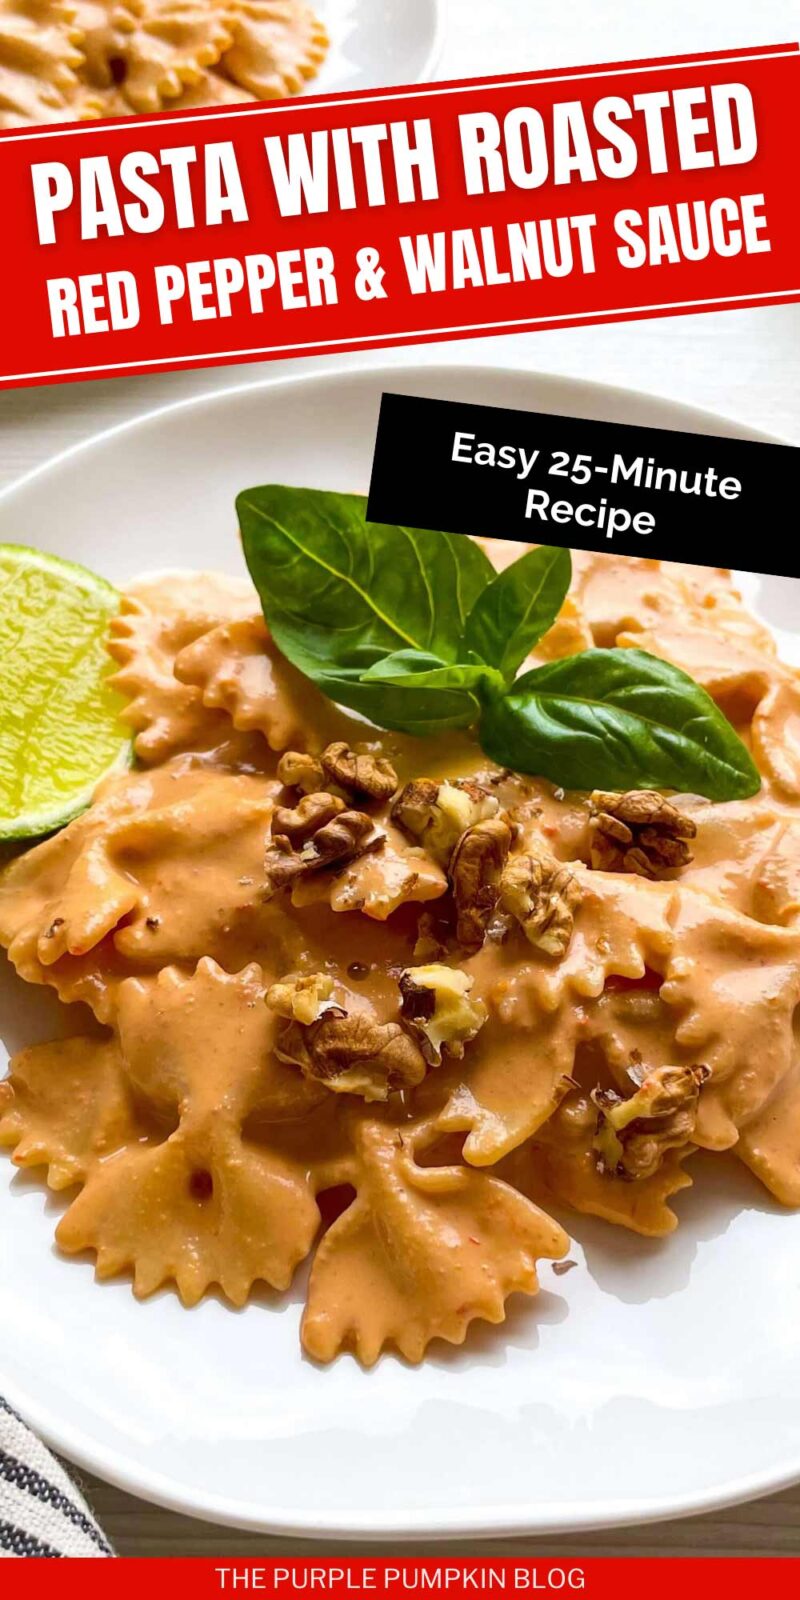 Pasta with Roasted Red Pepper & Walnut Sauce - Easy 25 Minute Recipe